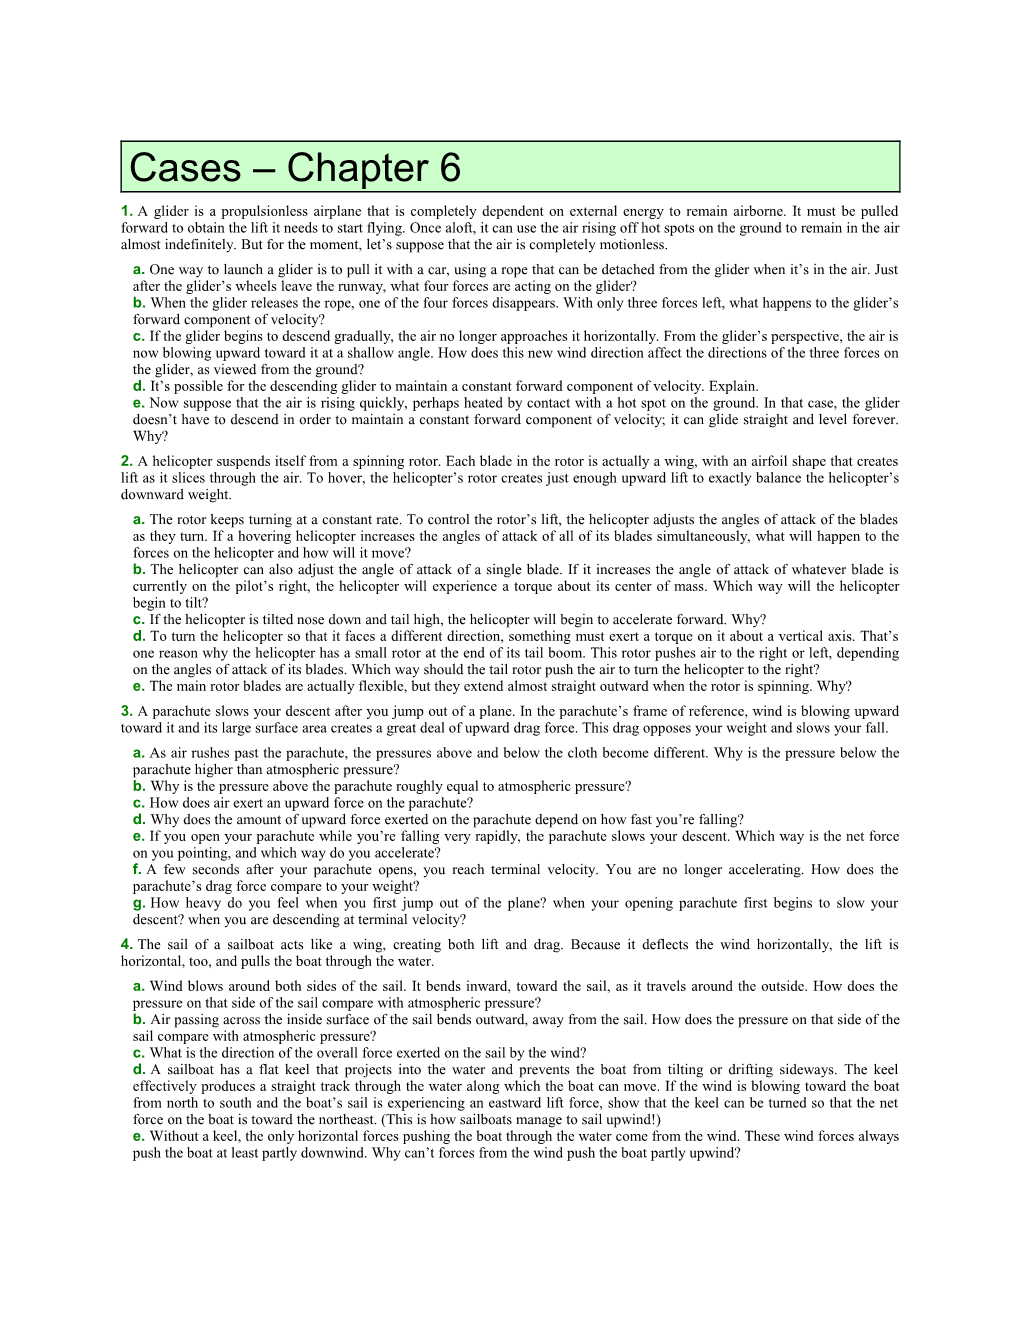 Cases Chapter 6